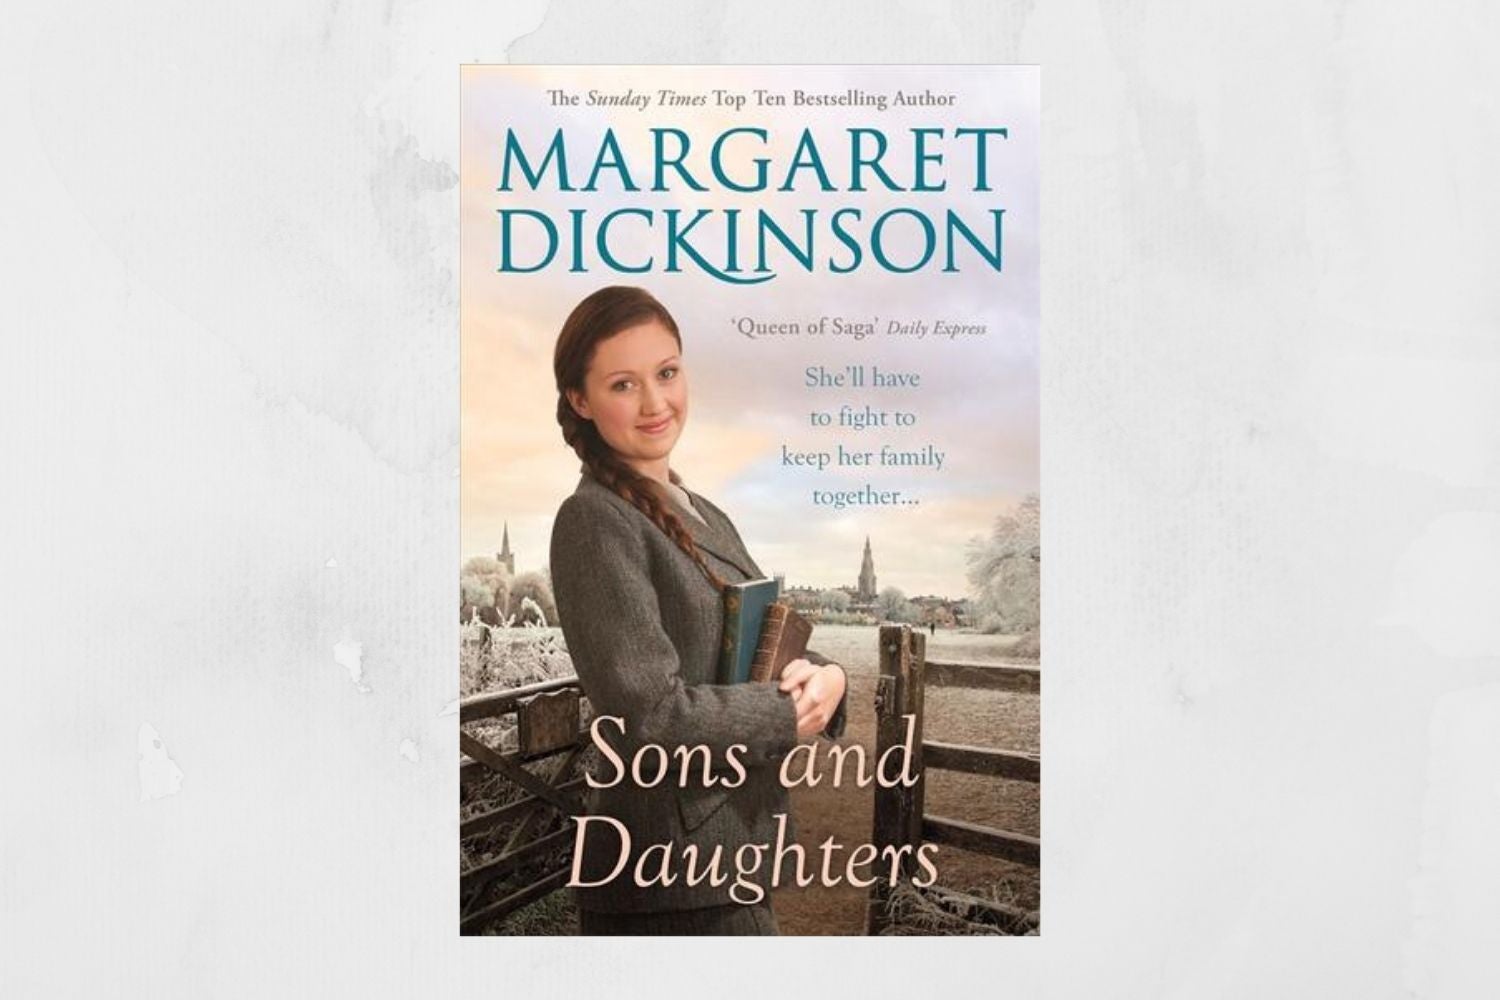 Sons and Daughters by Margaret Dickinson book cover